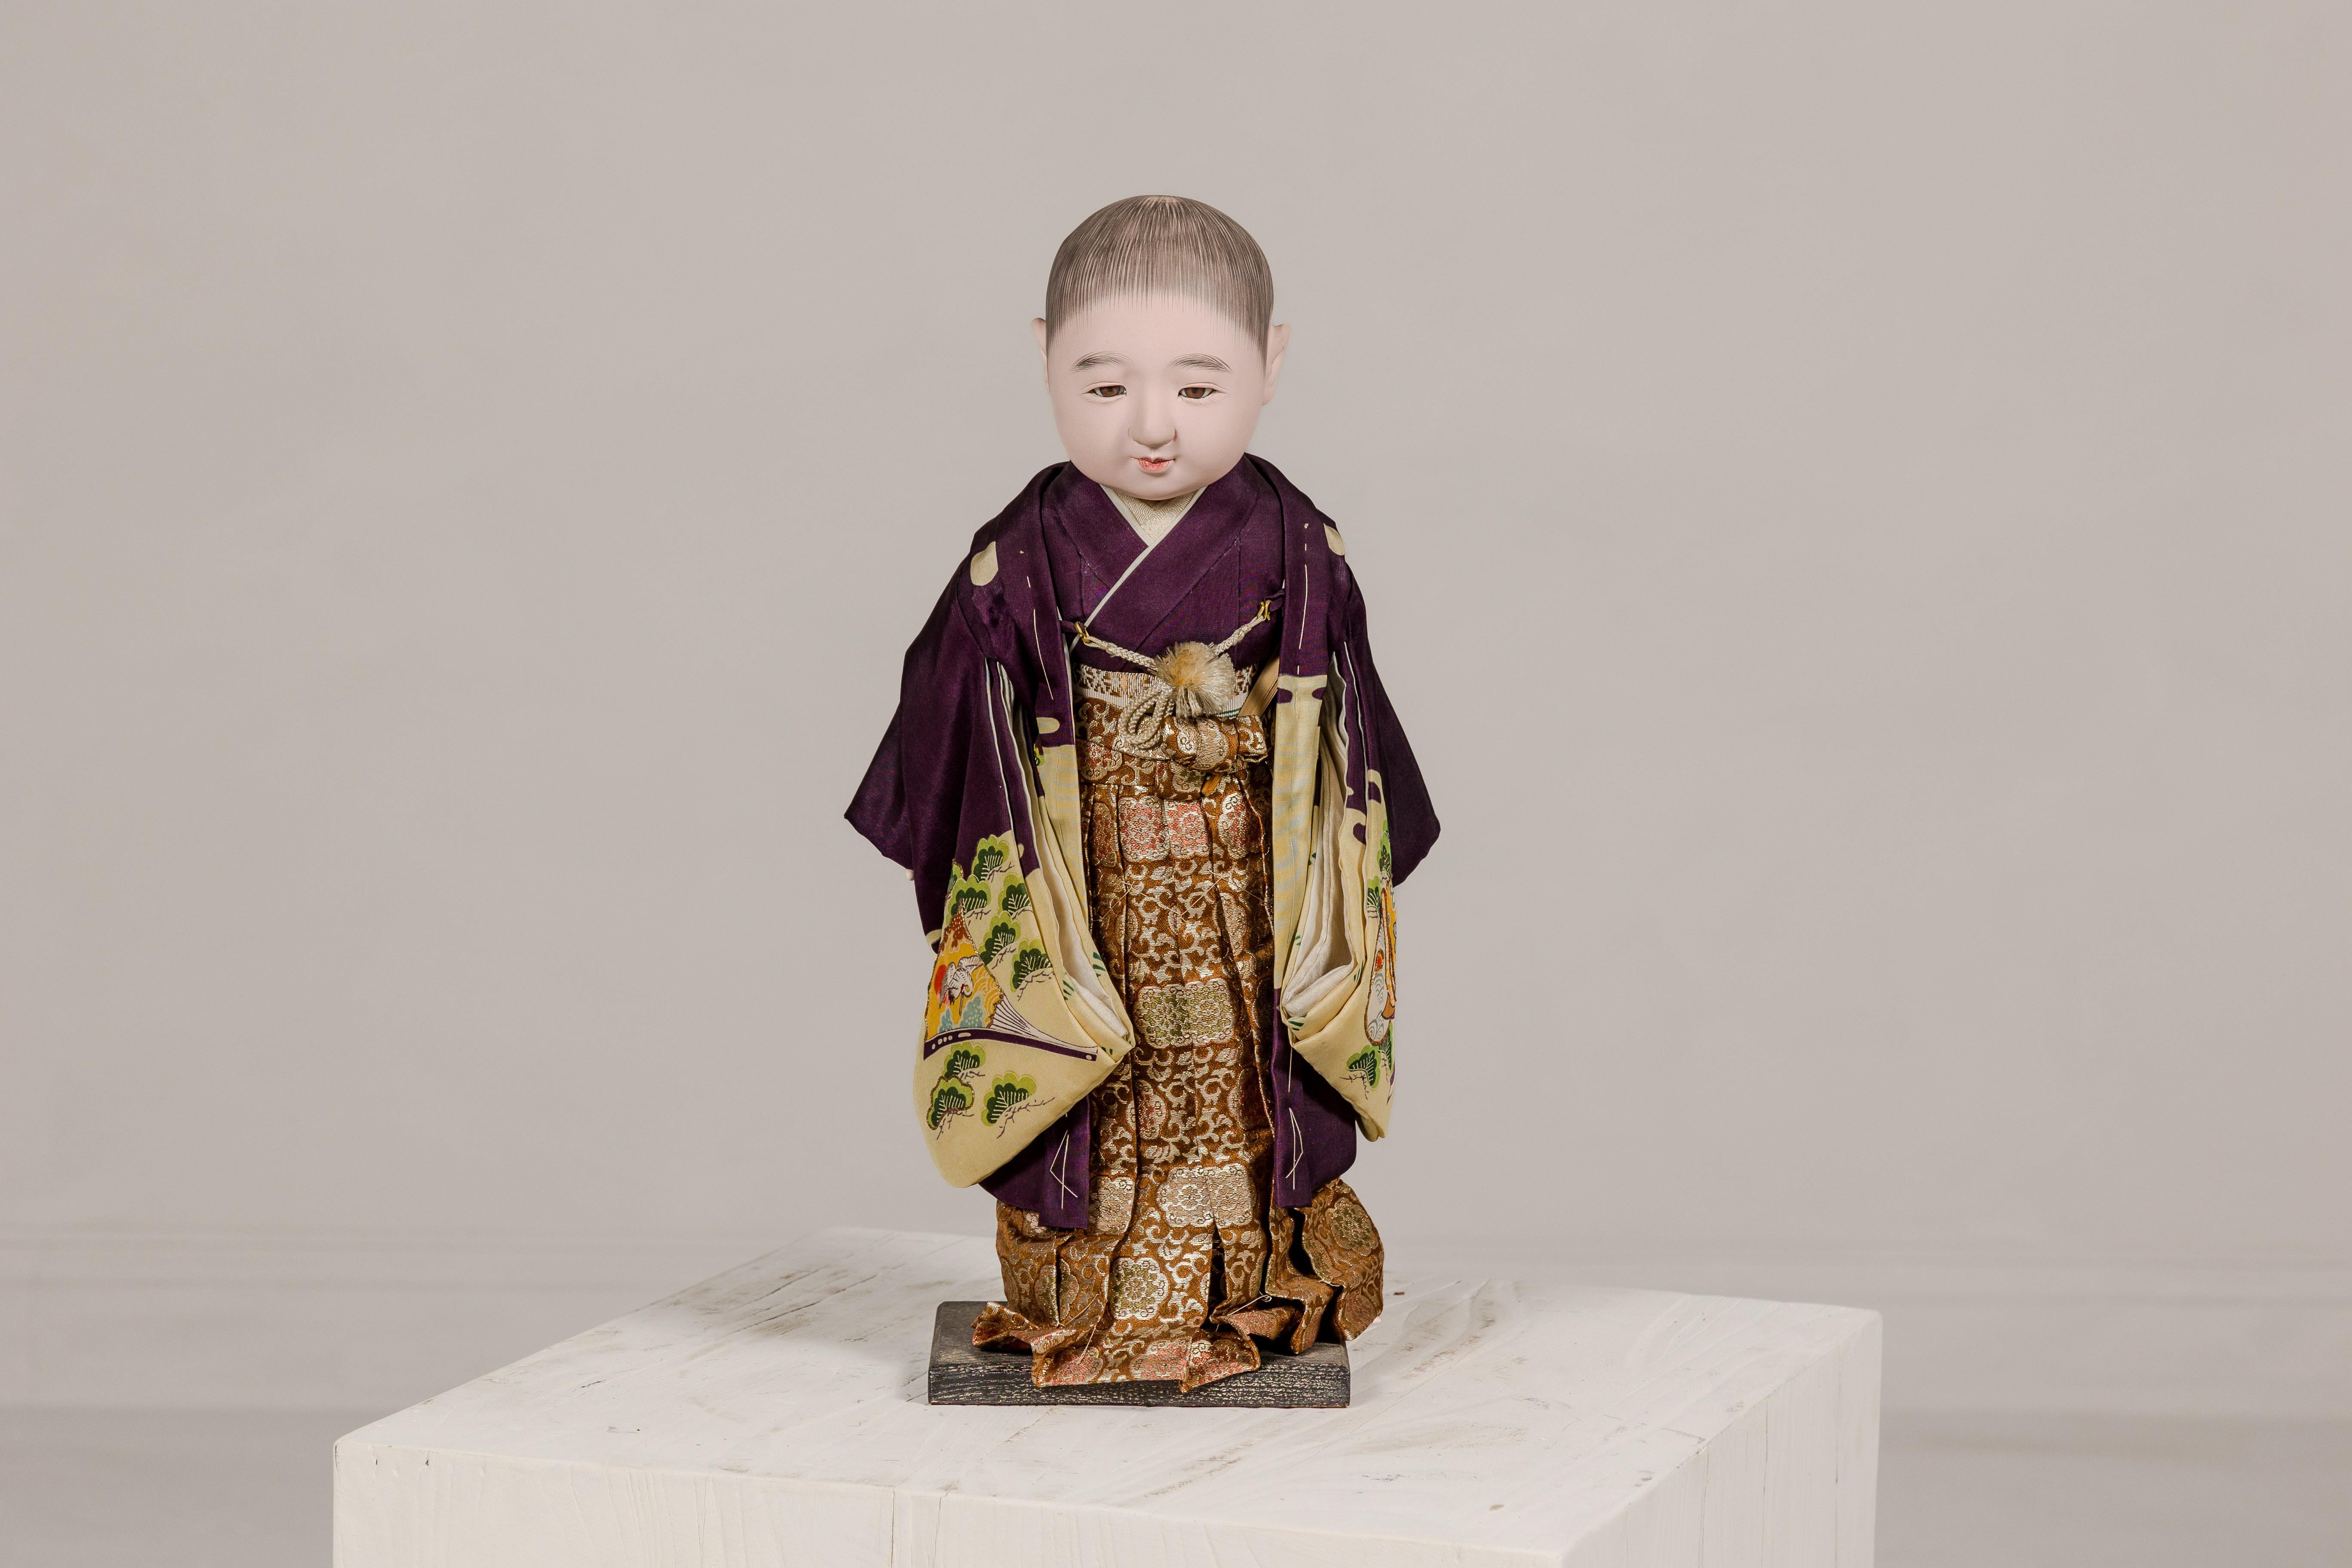 A Japanese Ichimatsu doll depicting a little boy wearing a city kimono. Step back in time and embrace the captivating charm of this vintage Ichimatsu doll, crafted circa 1950. Depicting a little boy adorned in a vibrant city kimono, this doll